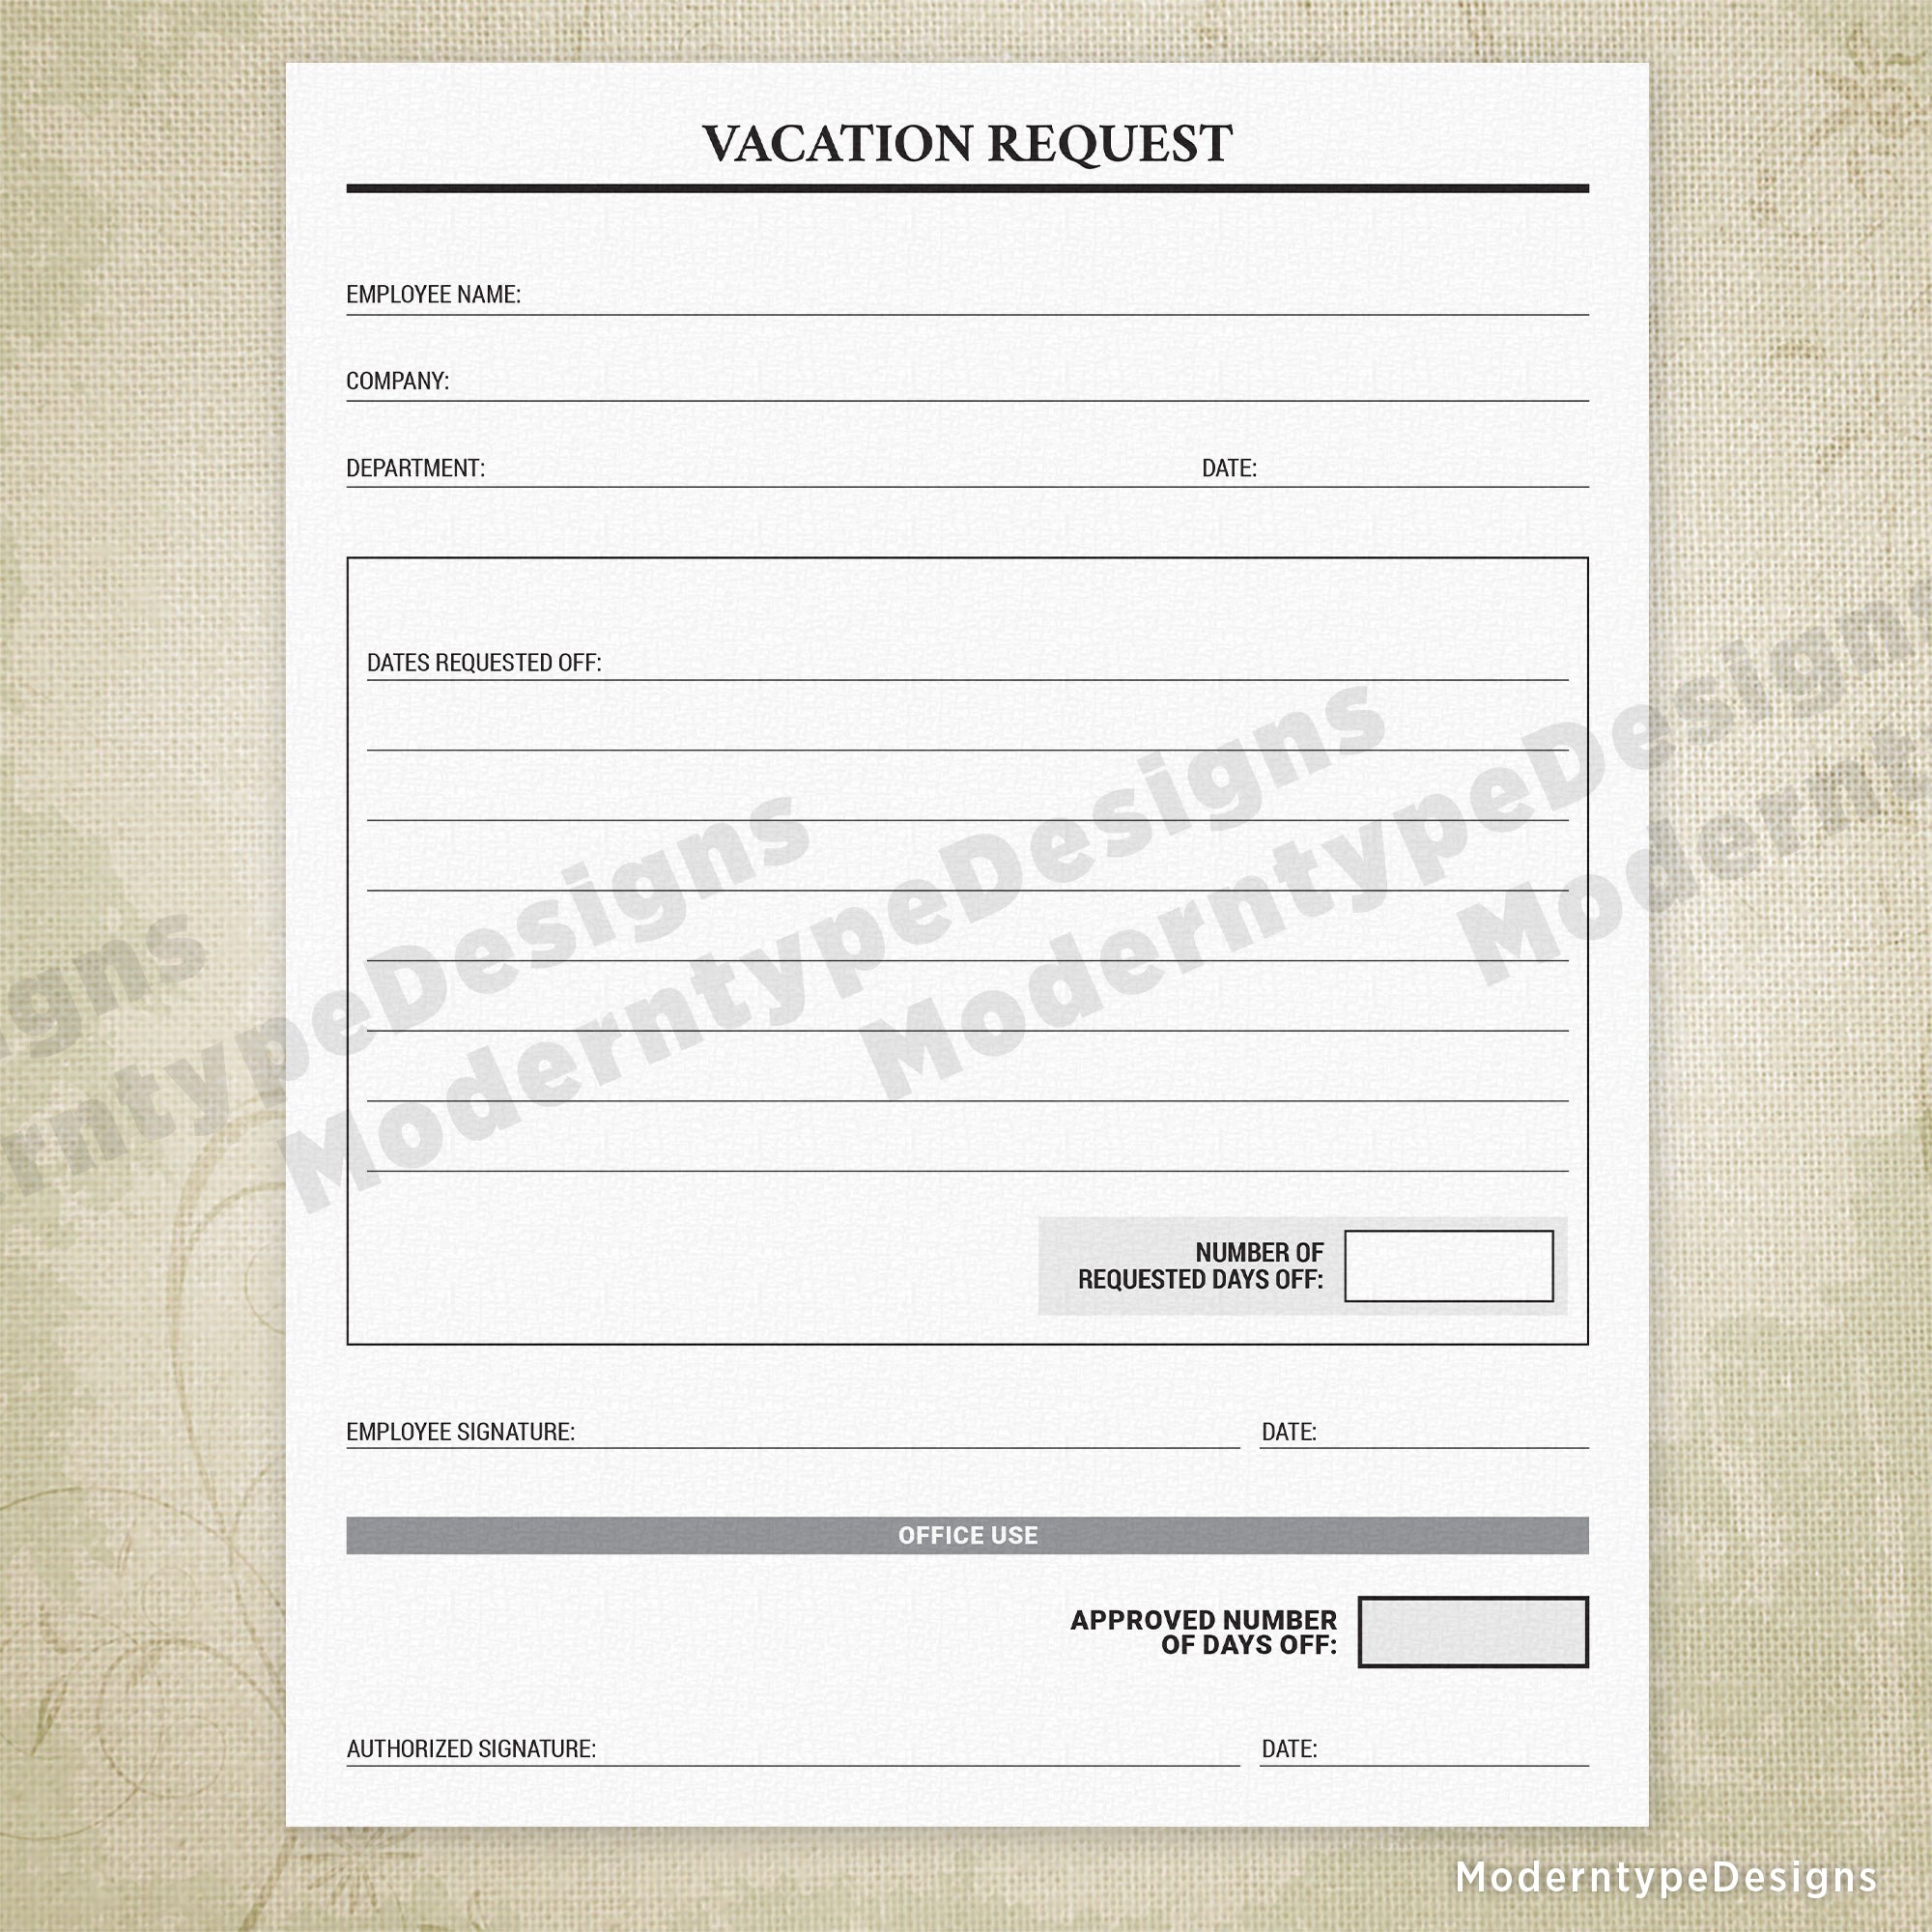 Employee Vacation Request Printable Form